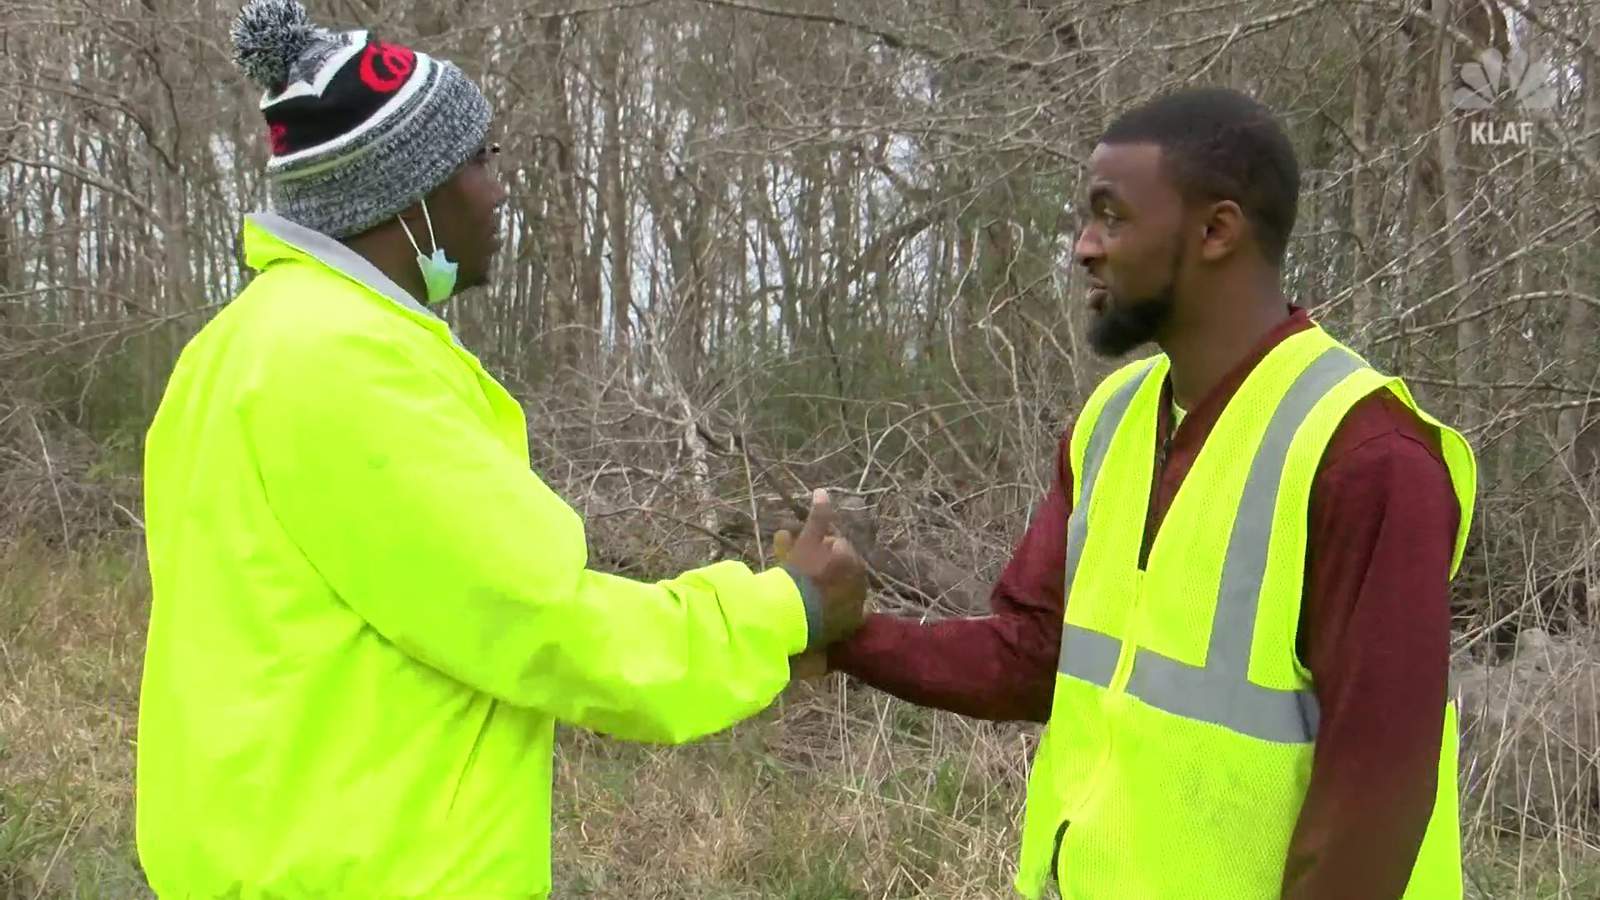 Kidnapped 10-year-old Louisiana girl saved thanks to two sanitation workers